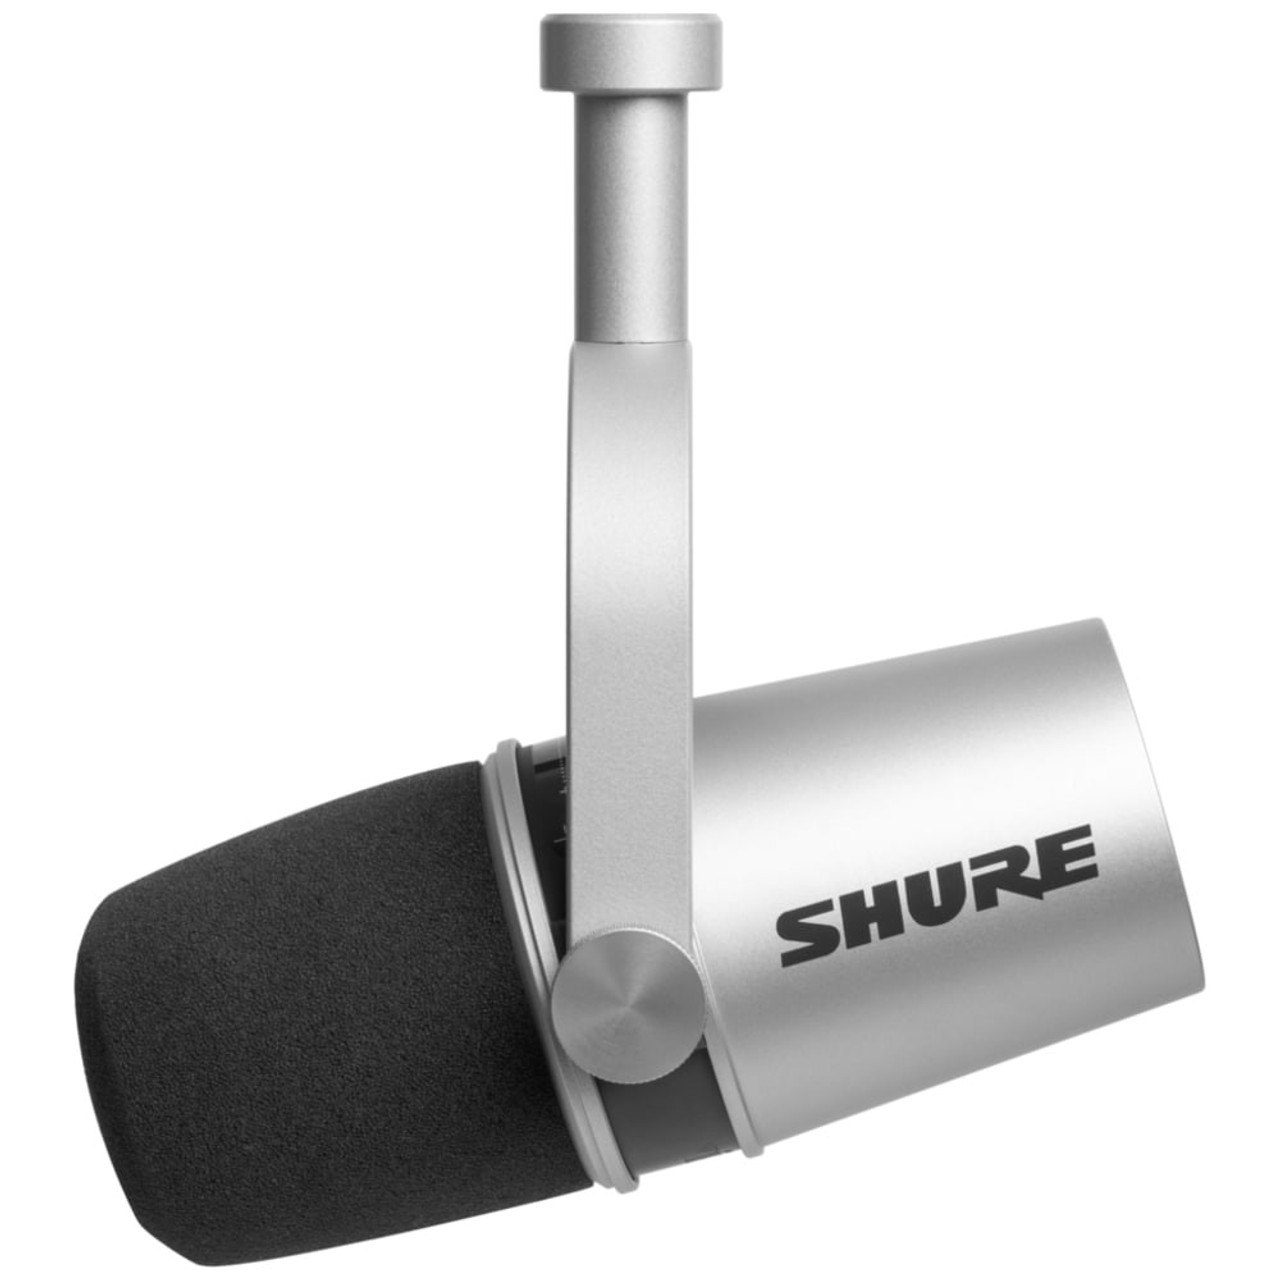 Shure launches MV7 Hybrid XLR/USB podcast Mic - Sound & Video Contractor